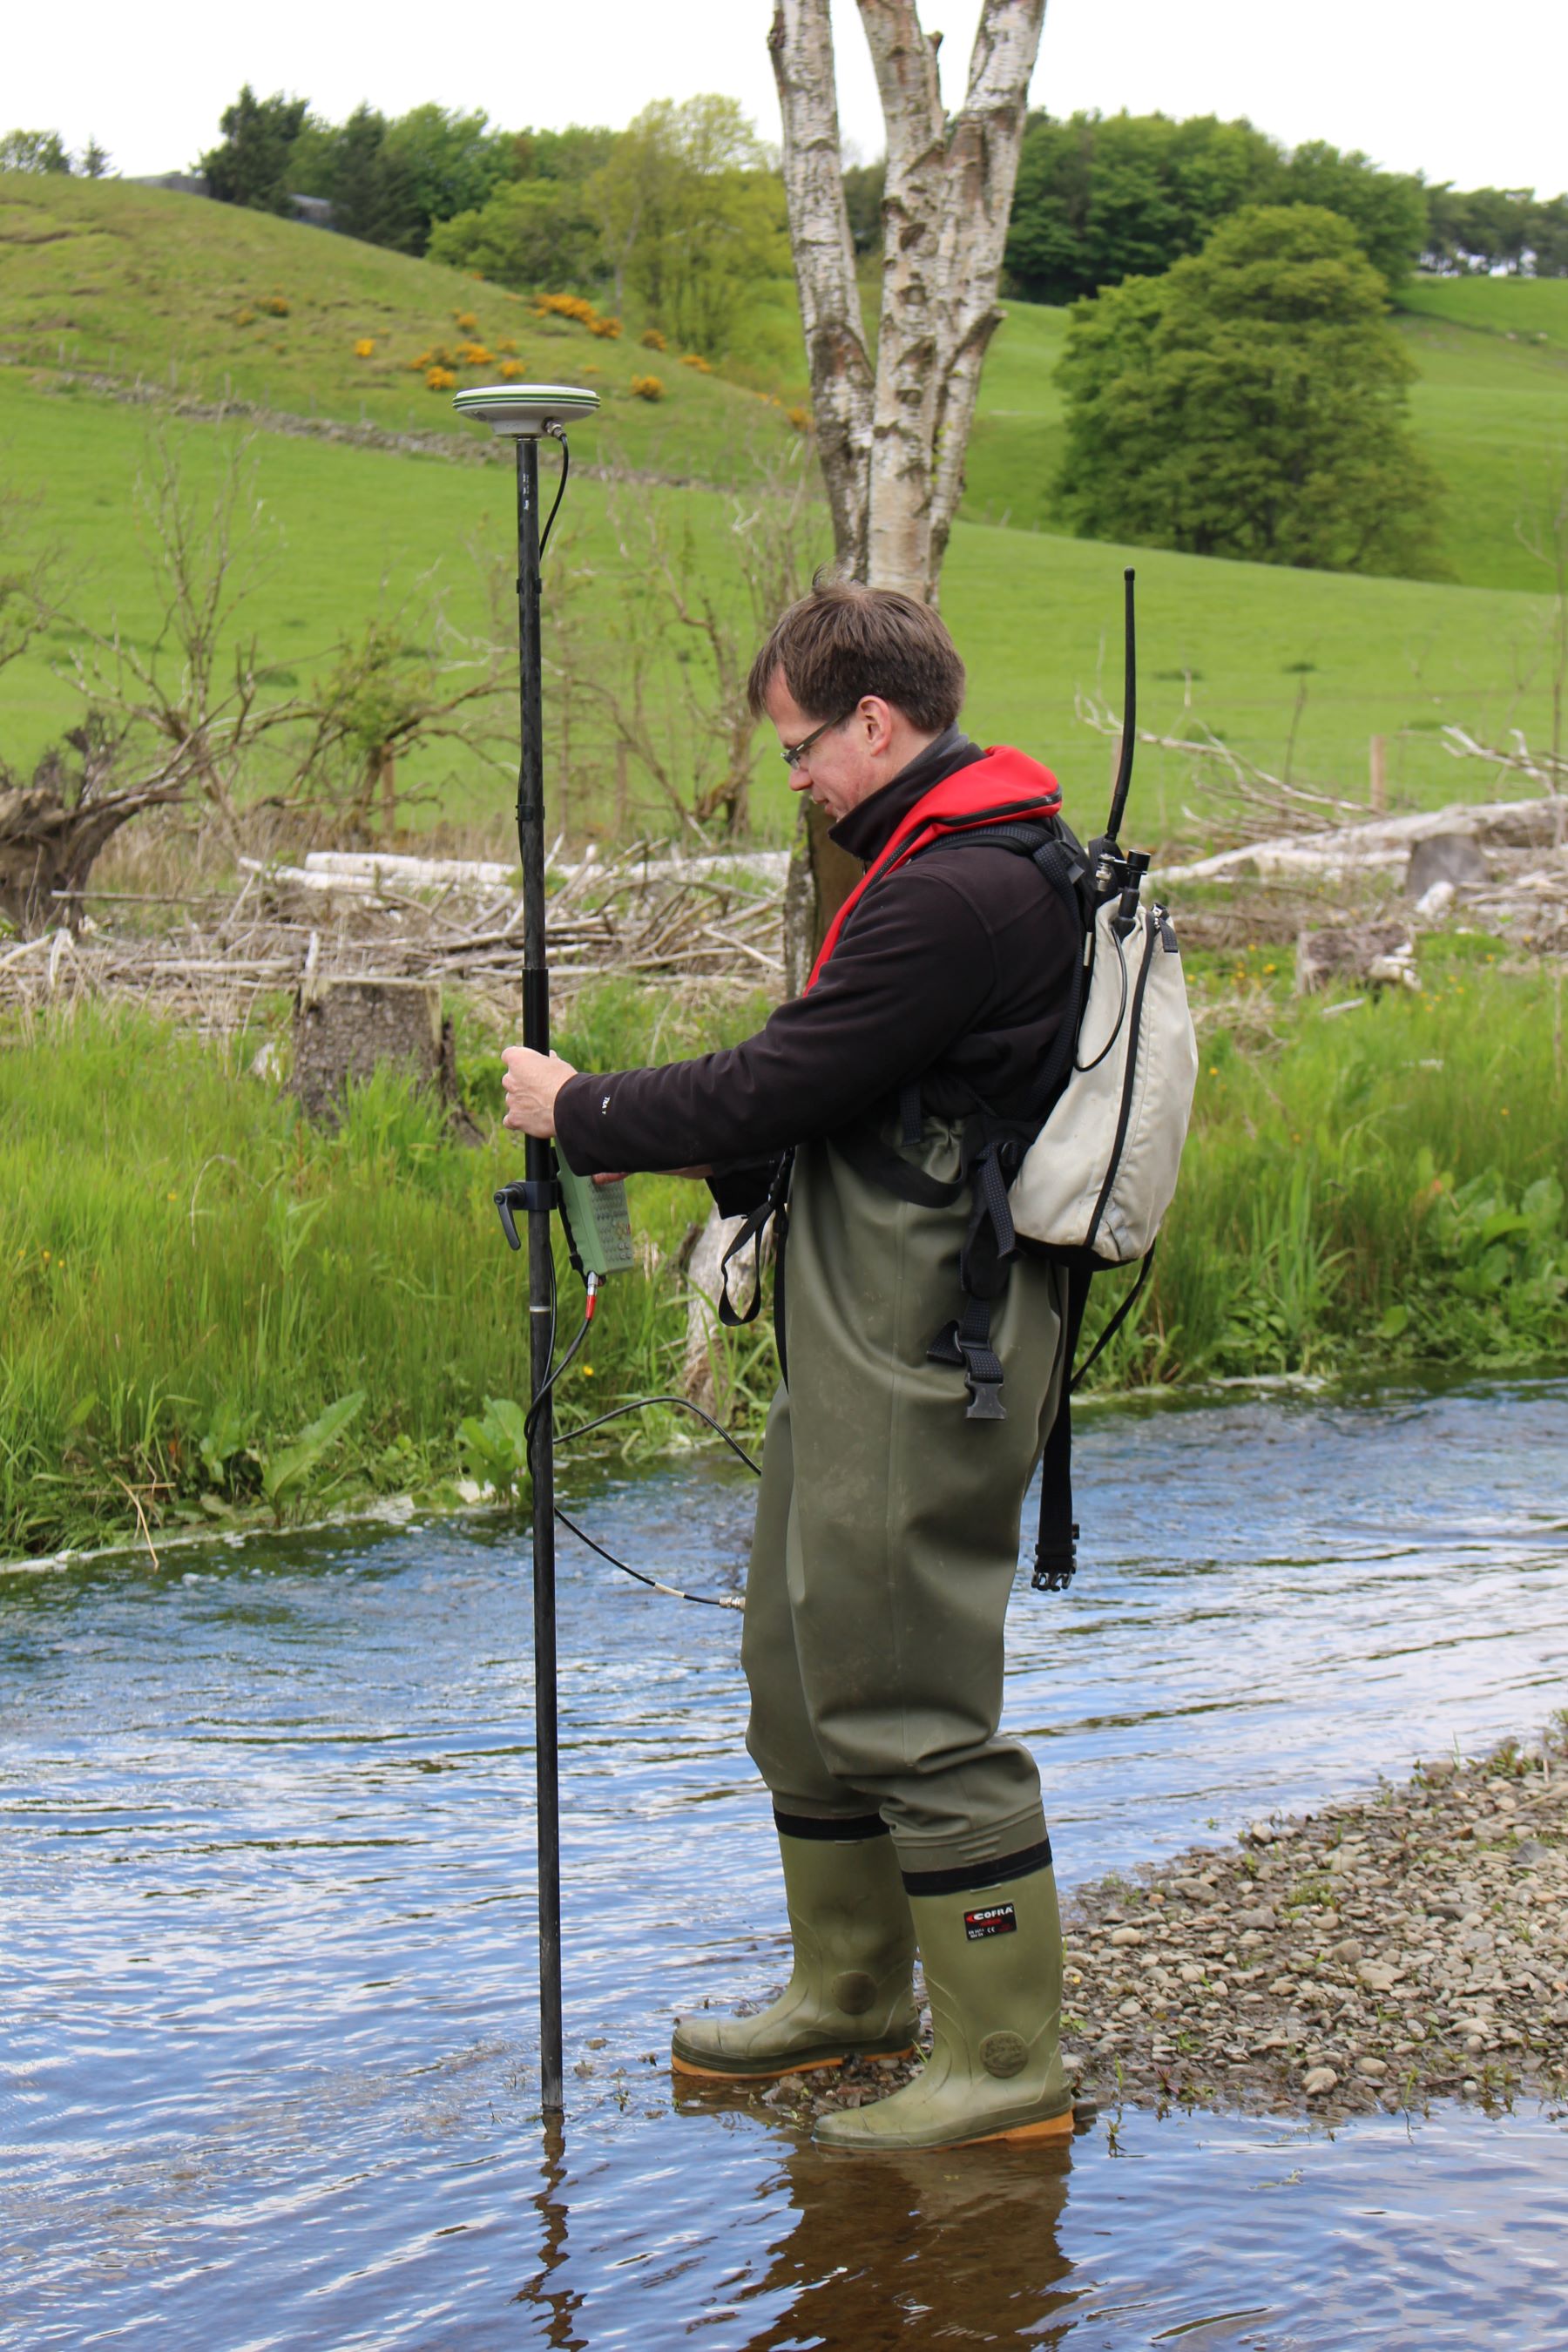 Man in waders with measuring stick in shallow stream